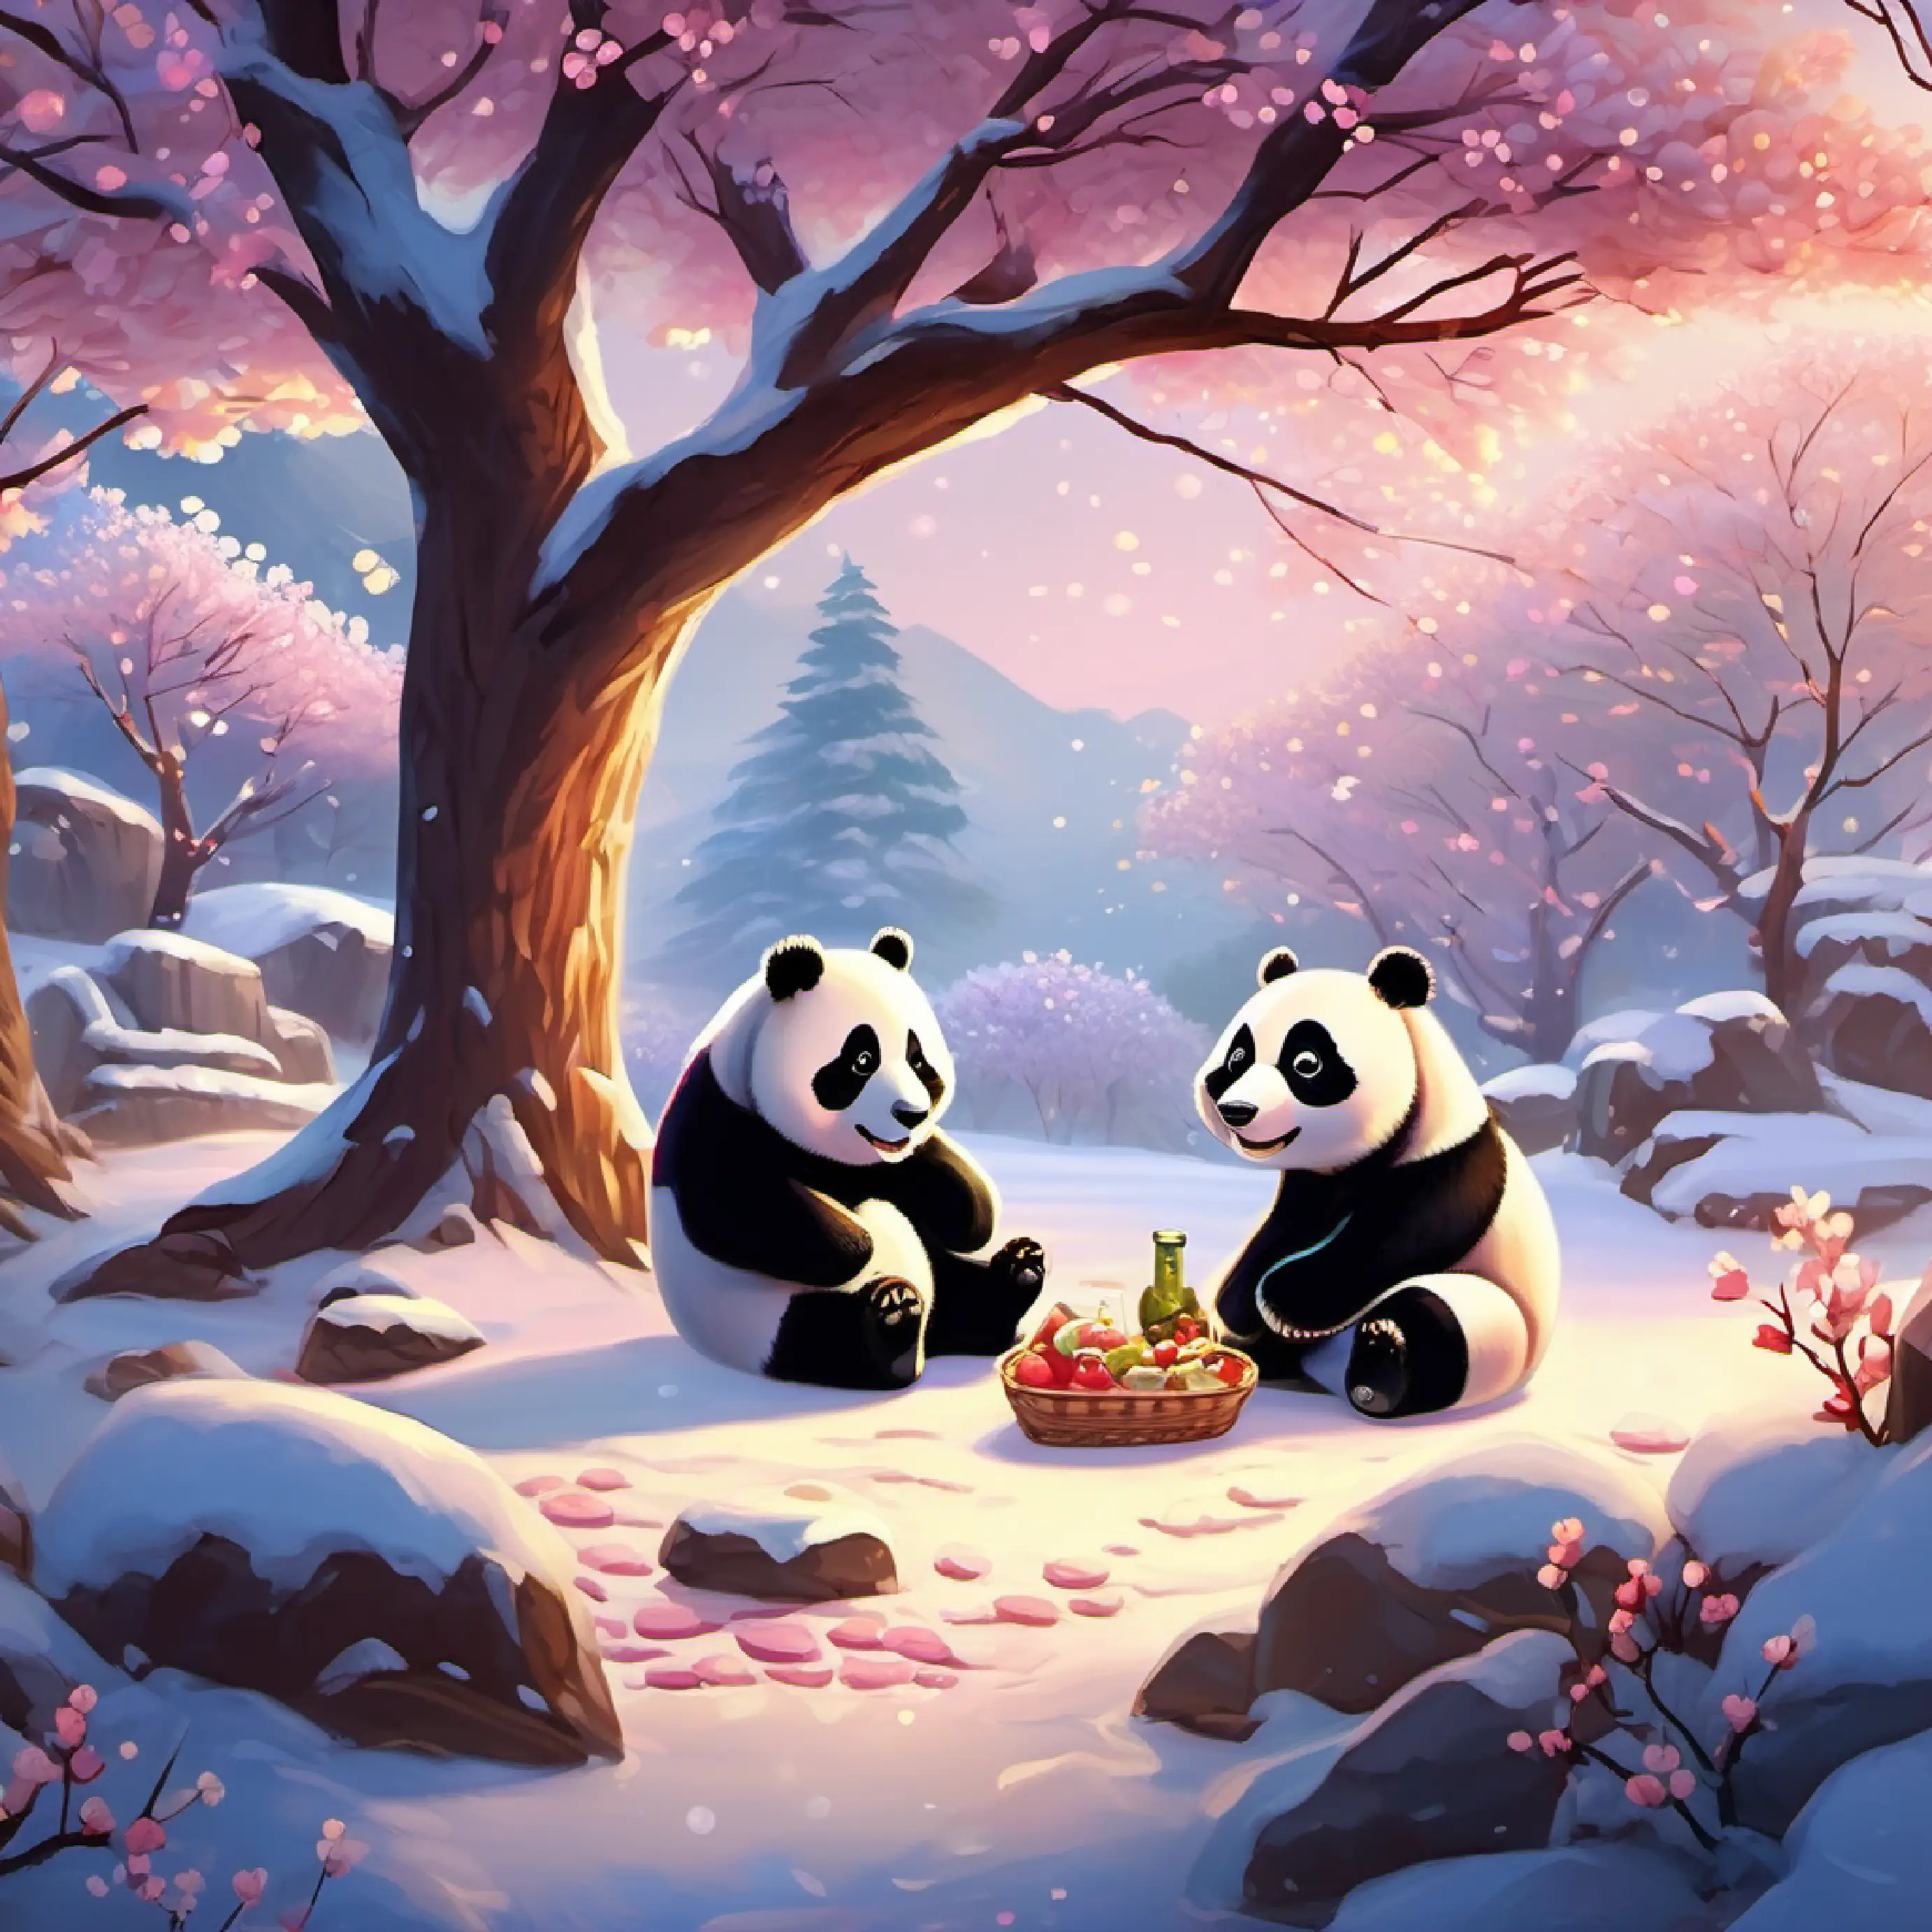 Snow-covered landscape with twinkling LED lights, cherry blossoms, and two fluffy baby pandas having a picnic.